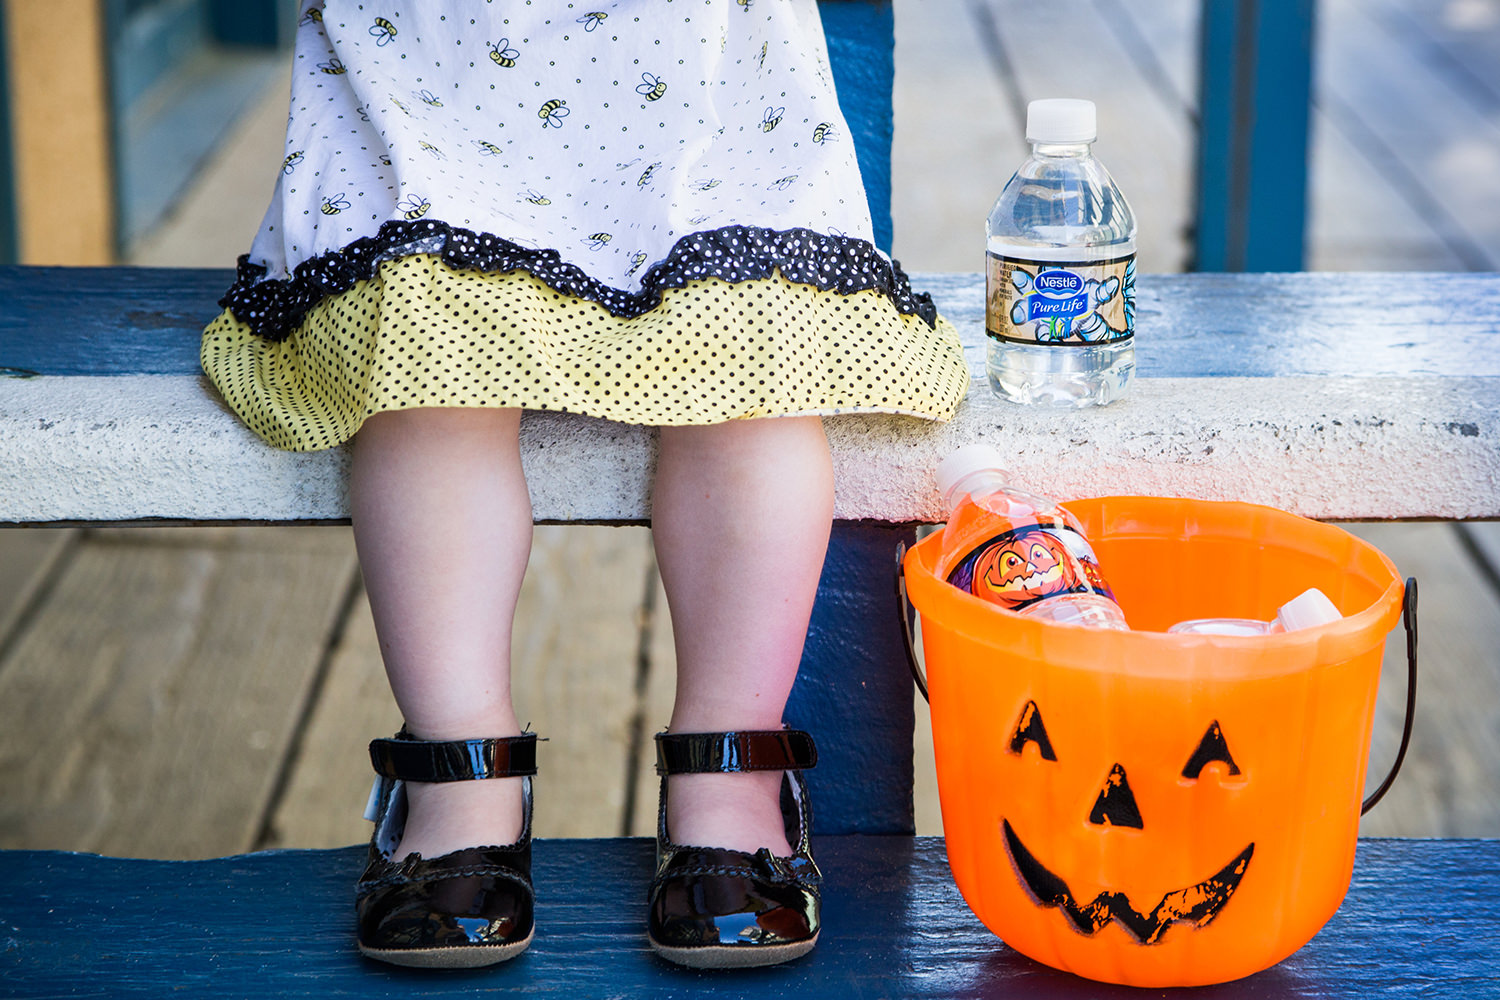 Gearing up for Trick-or-treating? These Halloween safety tips will keep your little goblins safe and happy while Trick-or-treating!